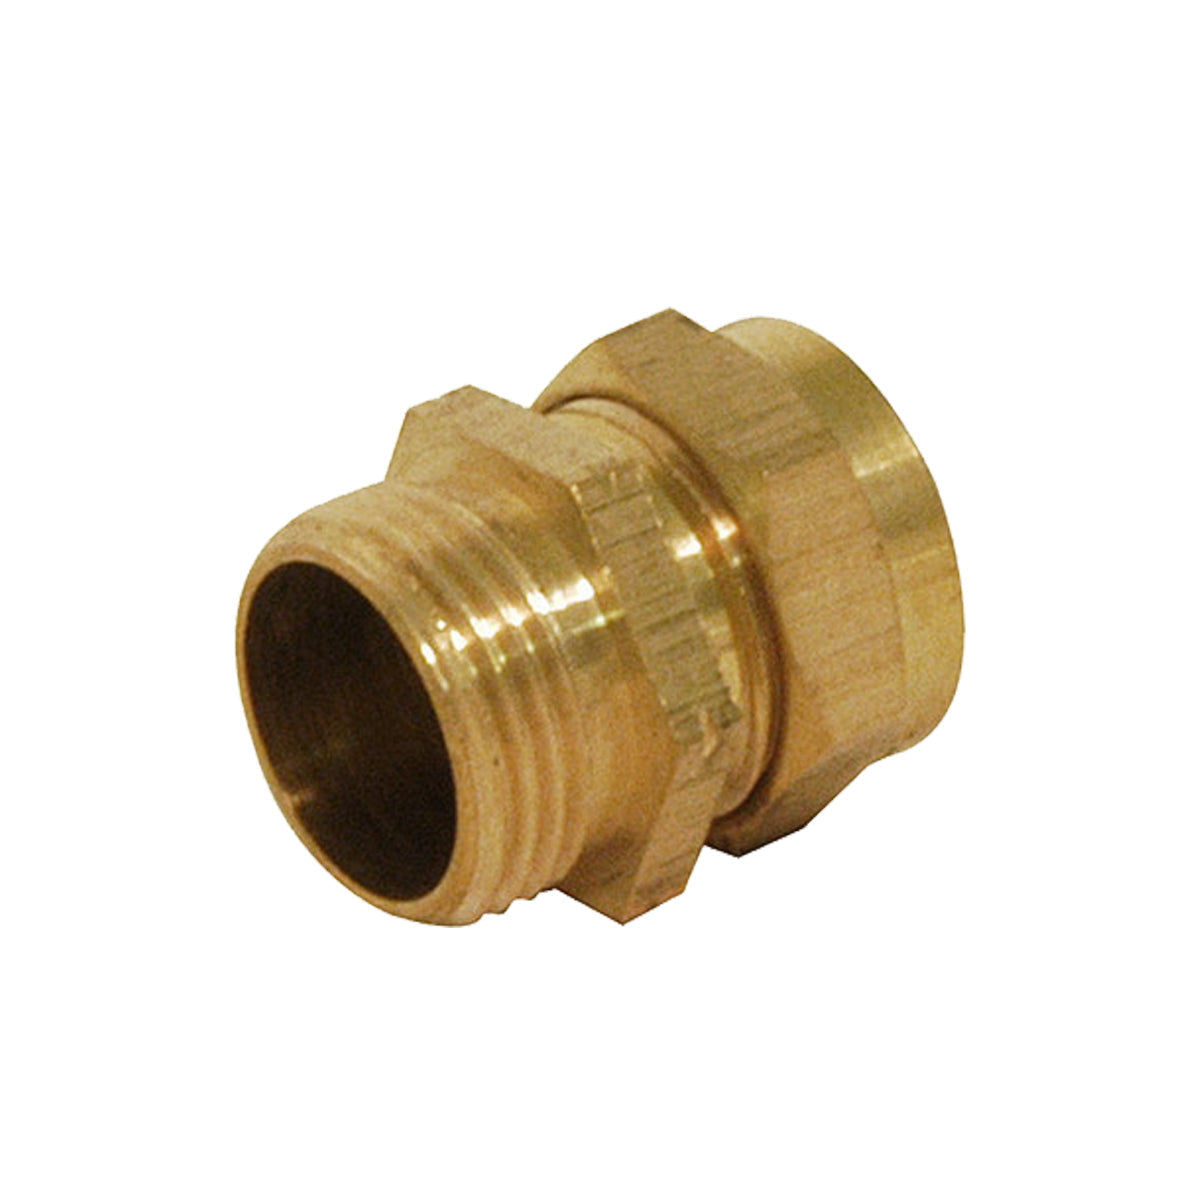 Electricalsone industrial Pipe lighting accessories Gland Brass